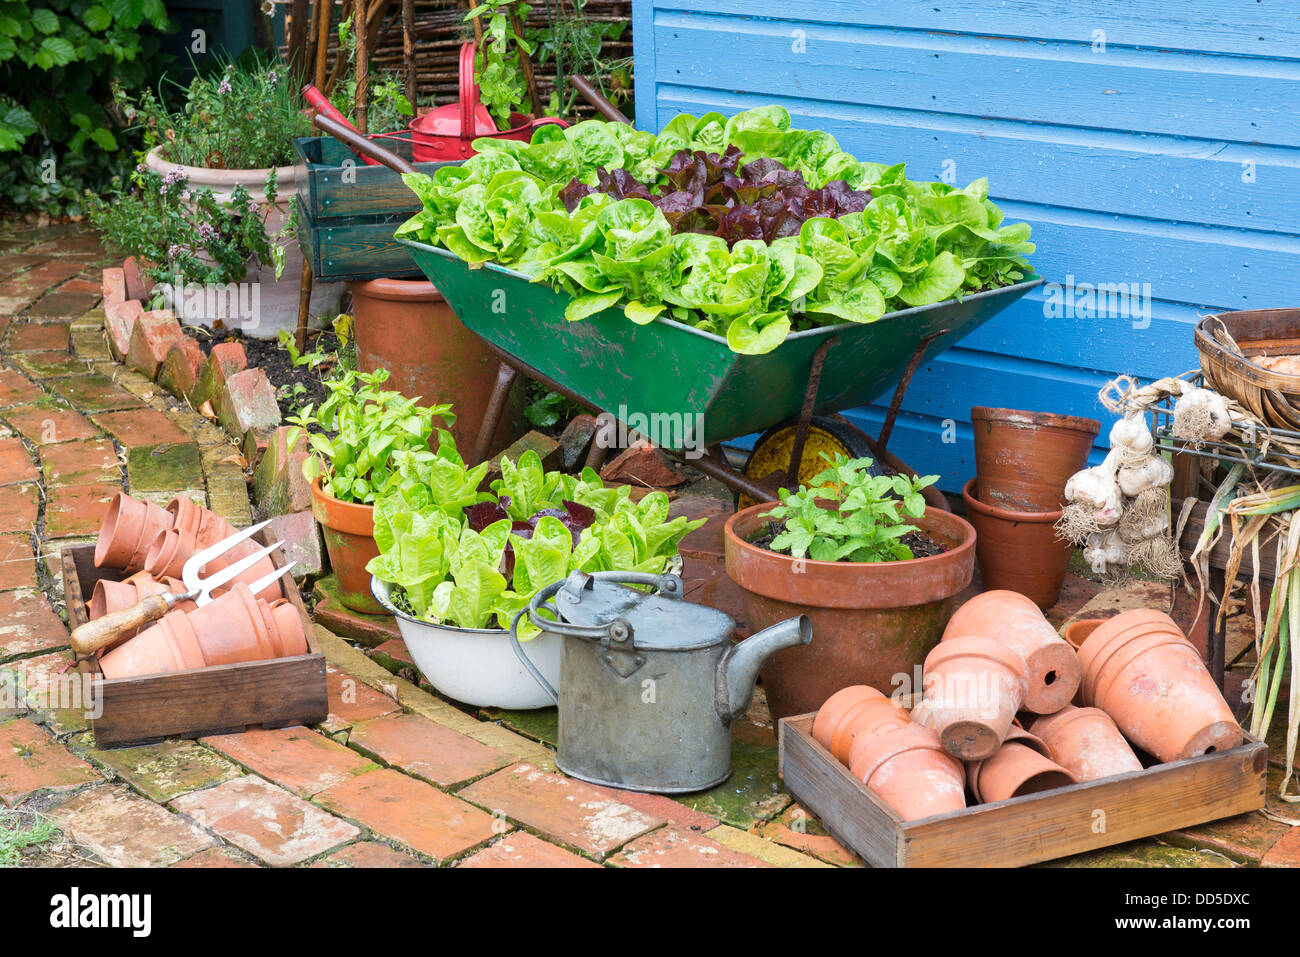 Small garden corner with old wheelbarrow and old enameled bowl planted with lettuce varieties 'Little gem pearl' and 'Dazzle' Stock Photo